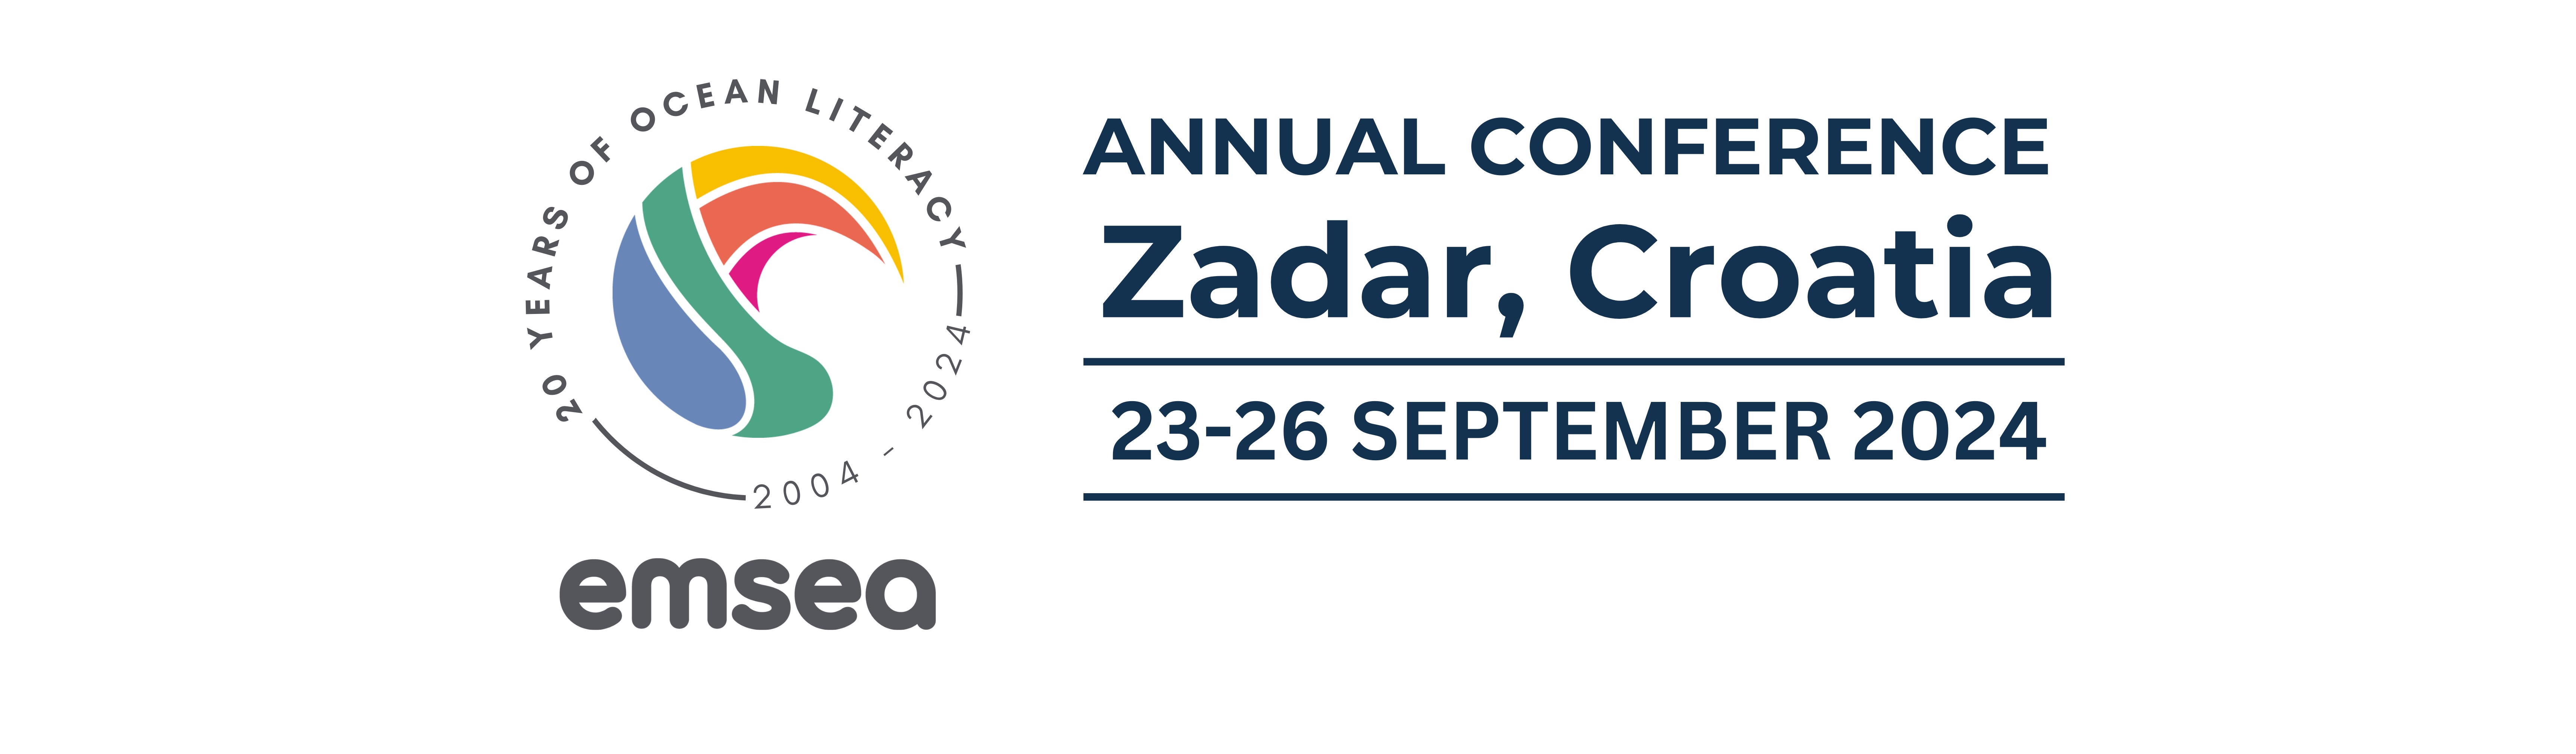 EMSEA logo and conference date (23-26 September) and place (zadar, Croatia)